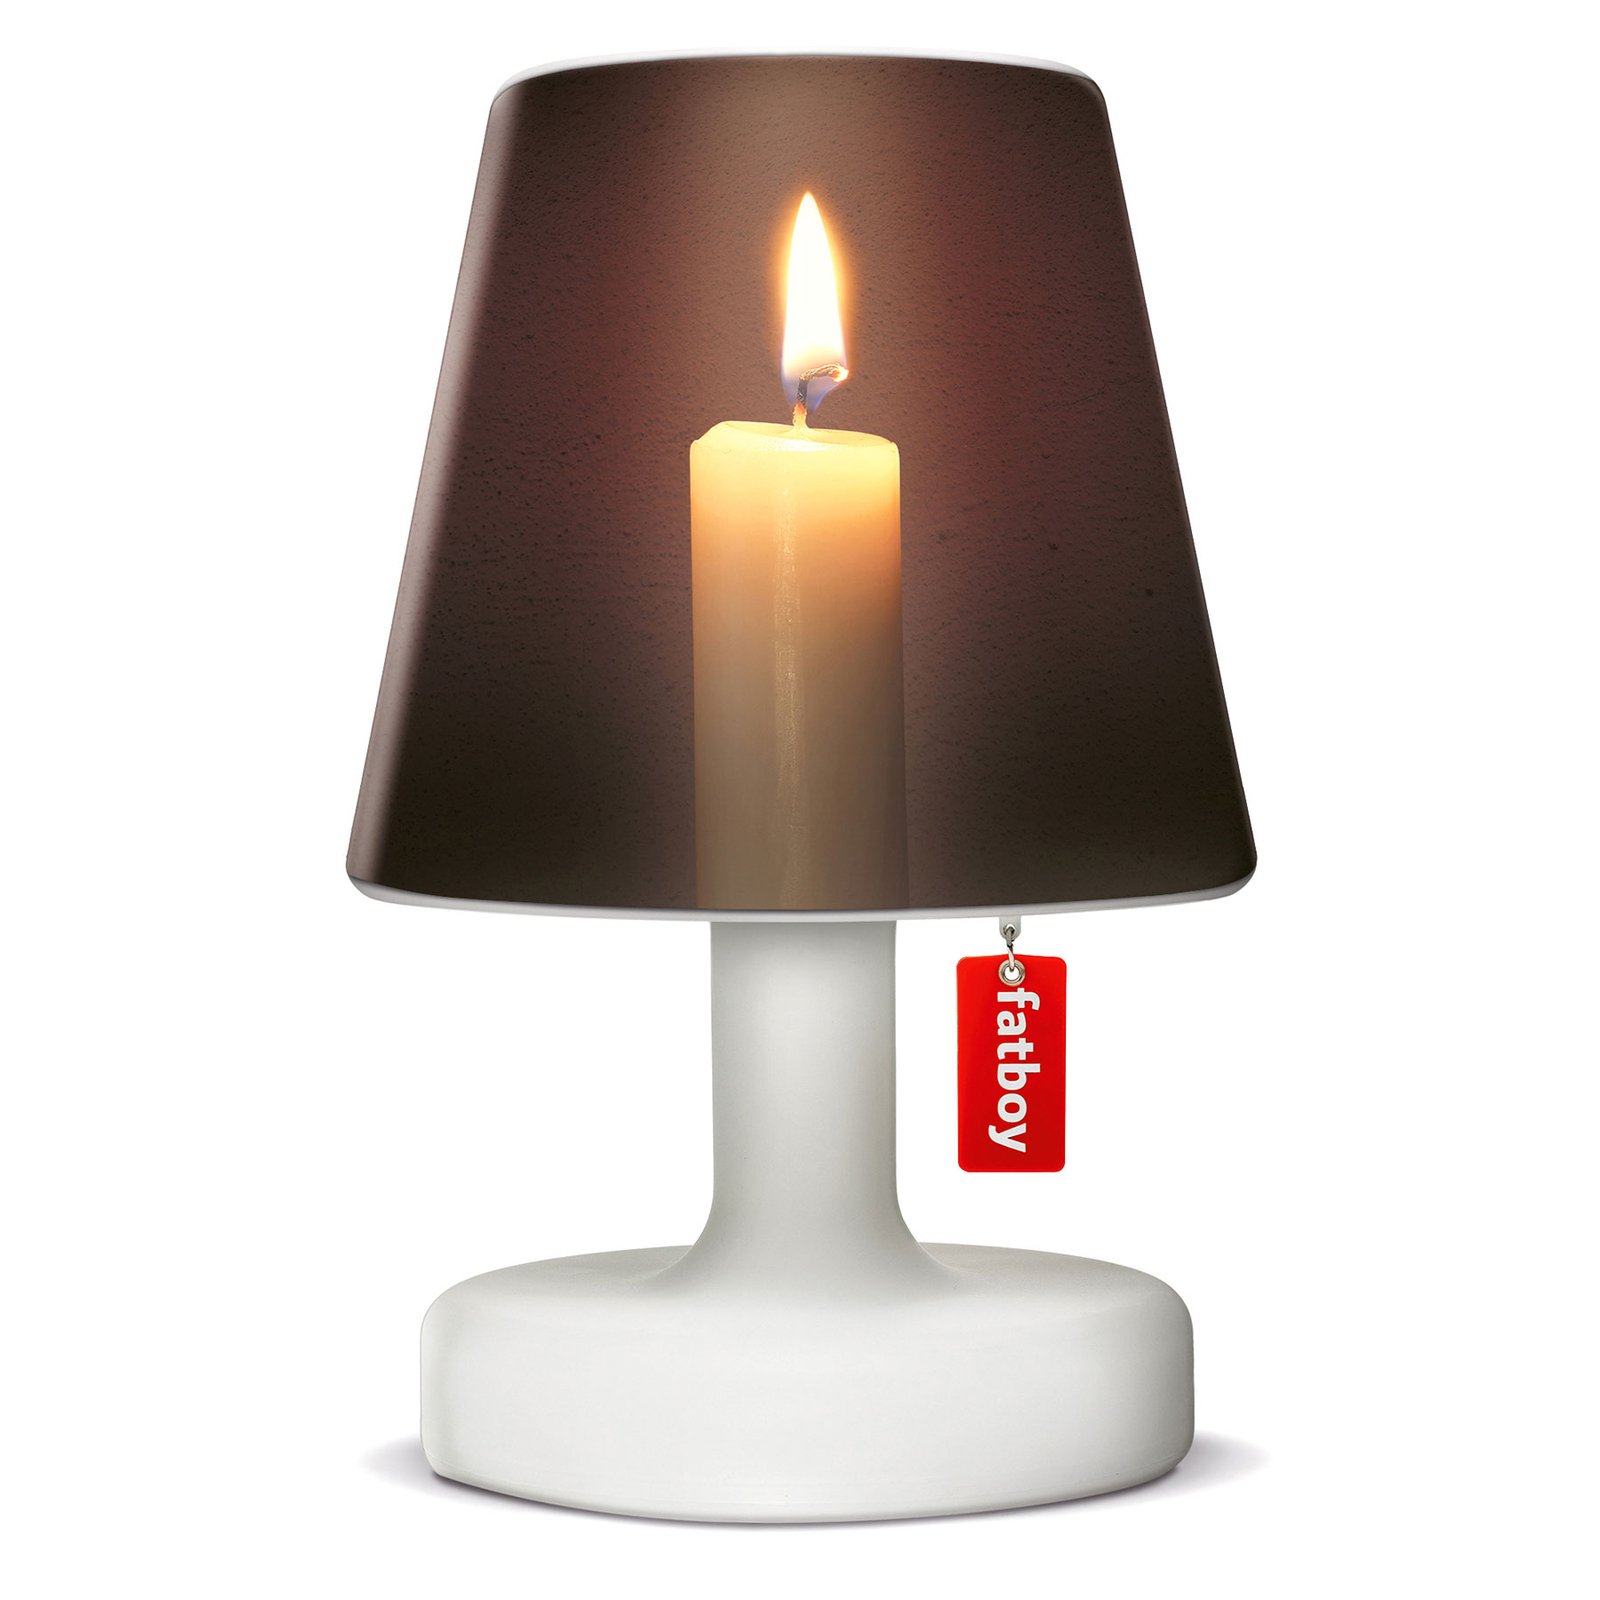 Fatboy Cooper Cappie shade, candlelight